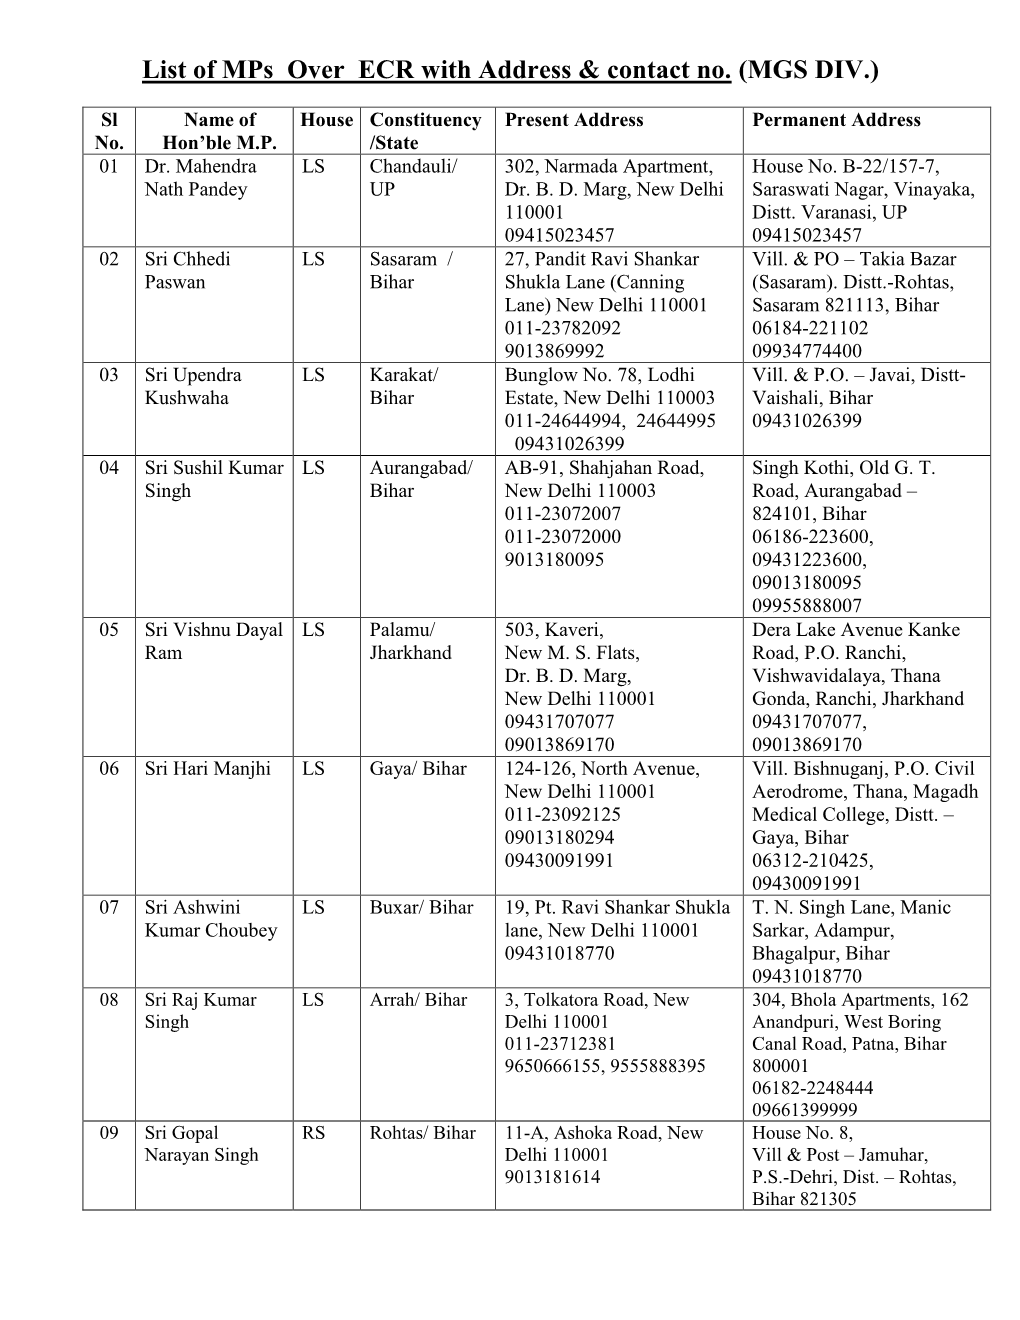 List of Mps Over ECR with Address & Contact No. (MGS DIV.)